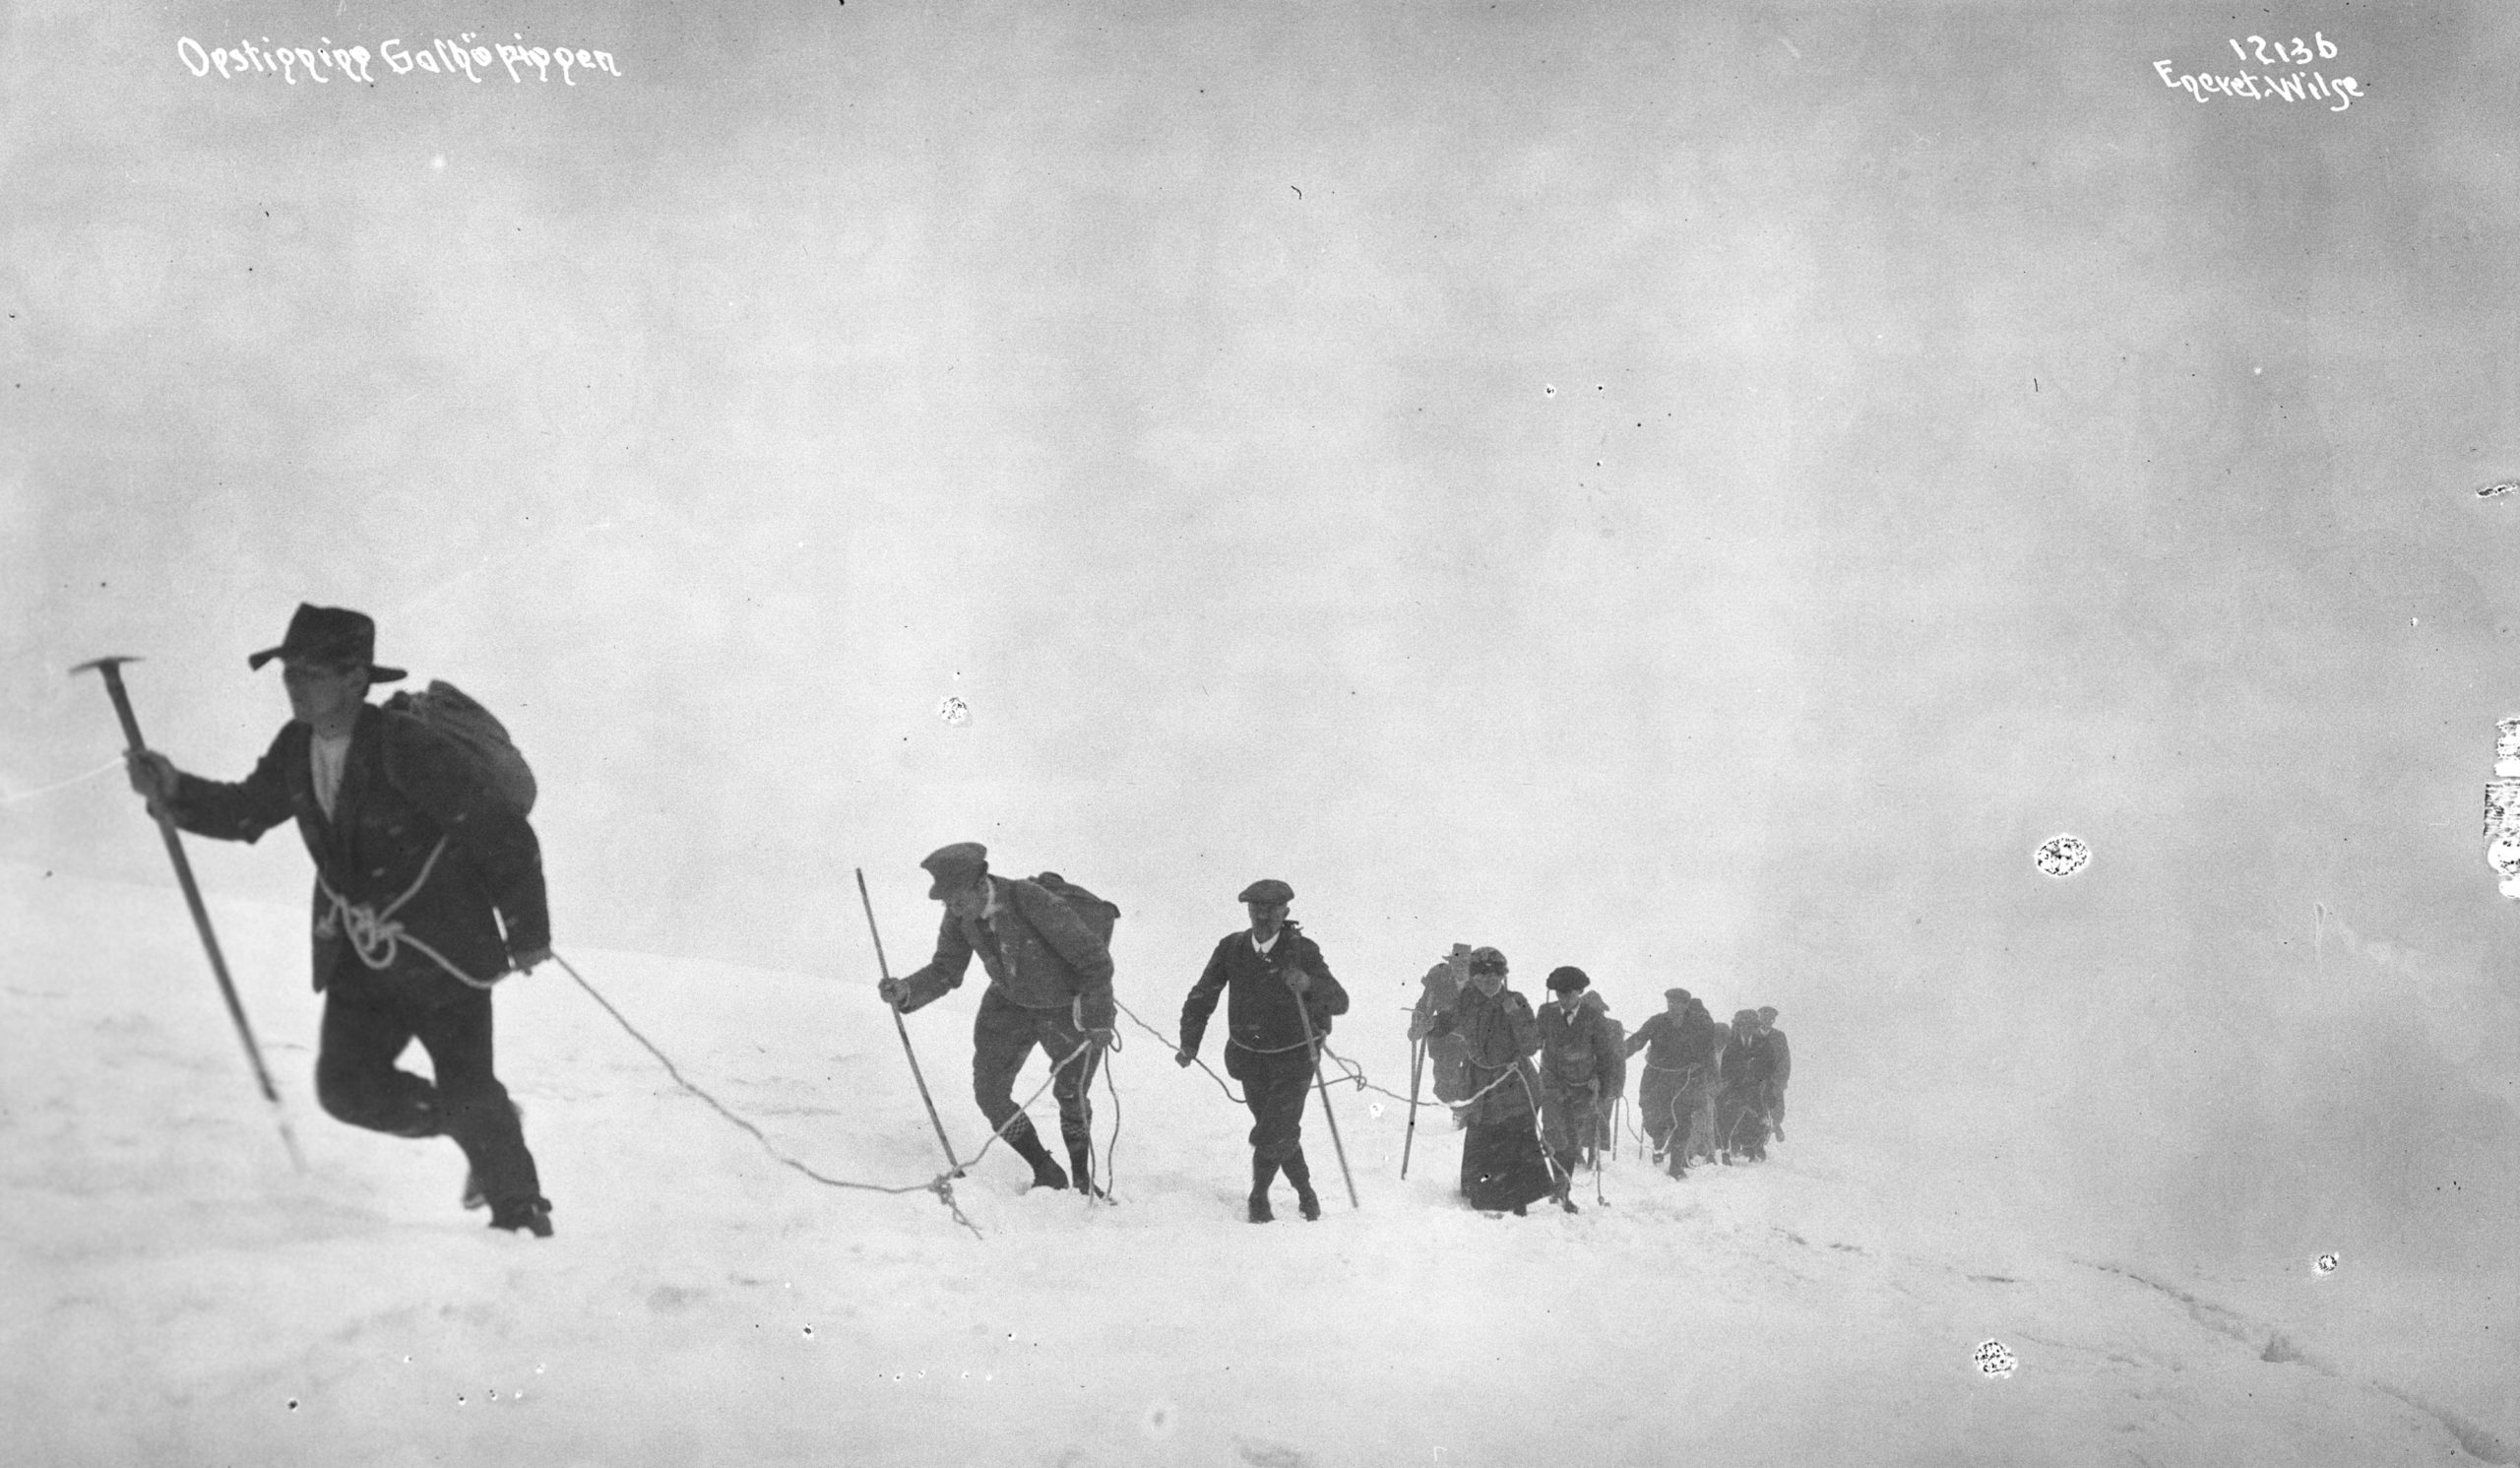 A black and white photograph of a group of around 10 mountaineers walking up a steep snowy mountainside